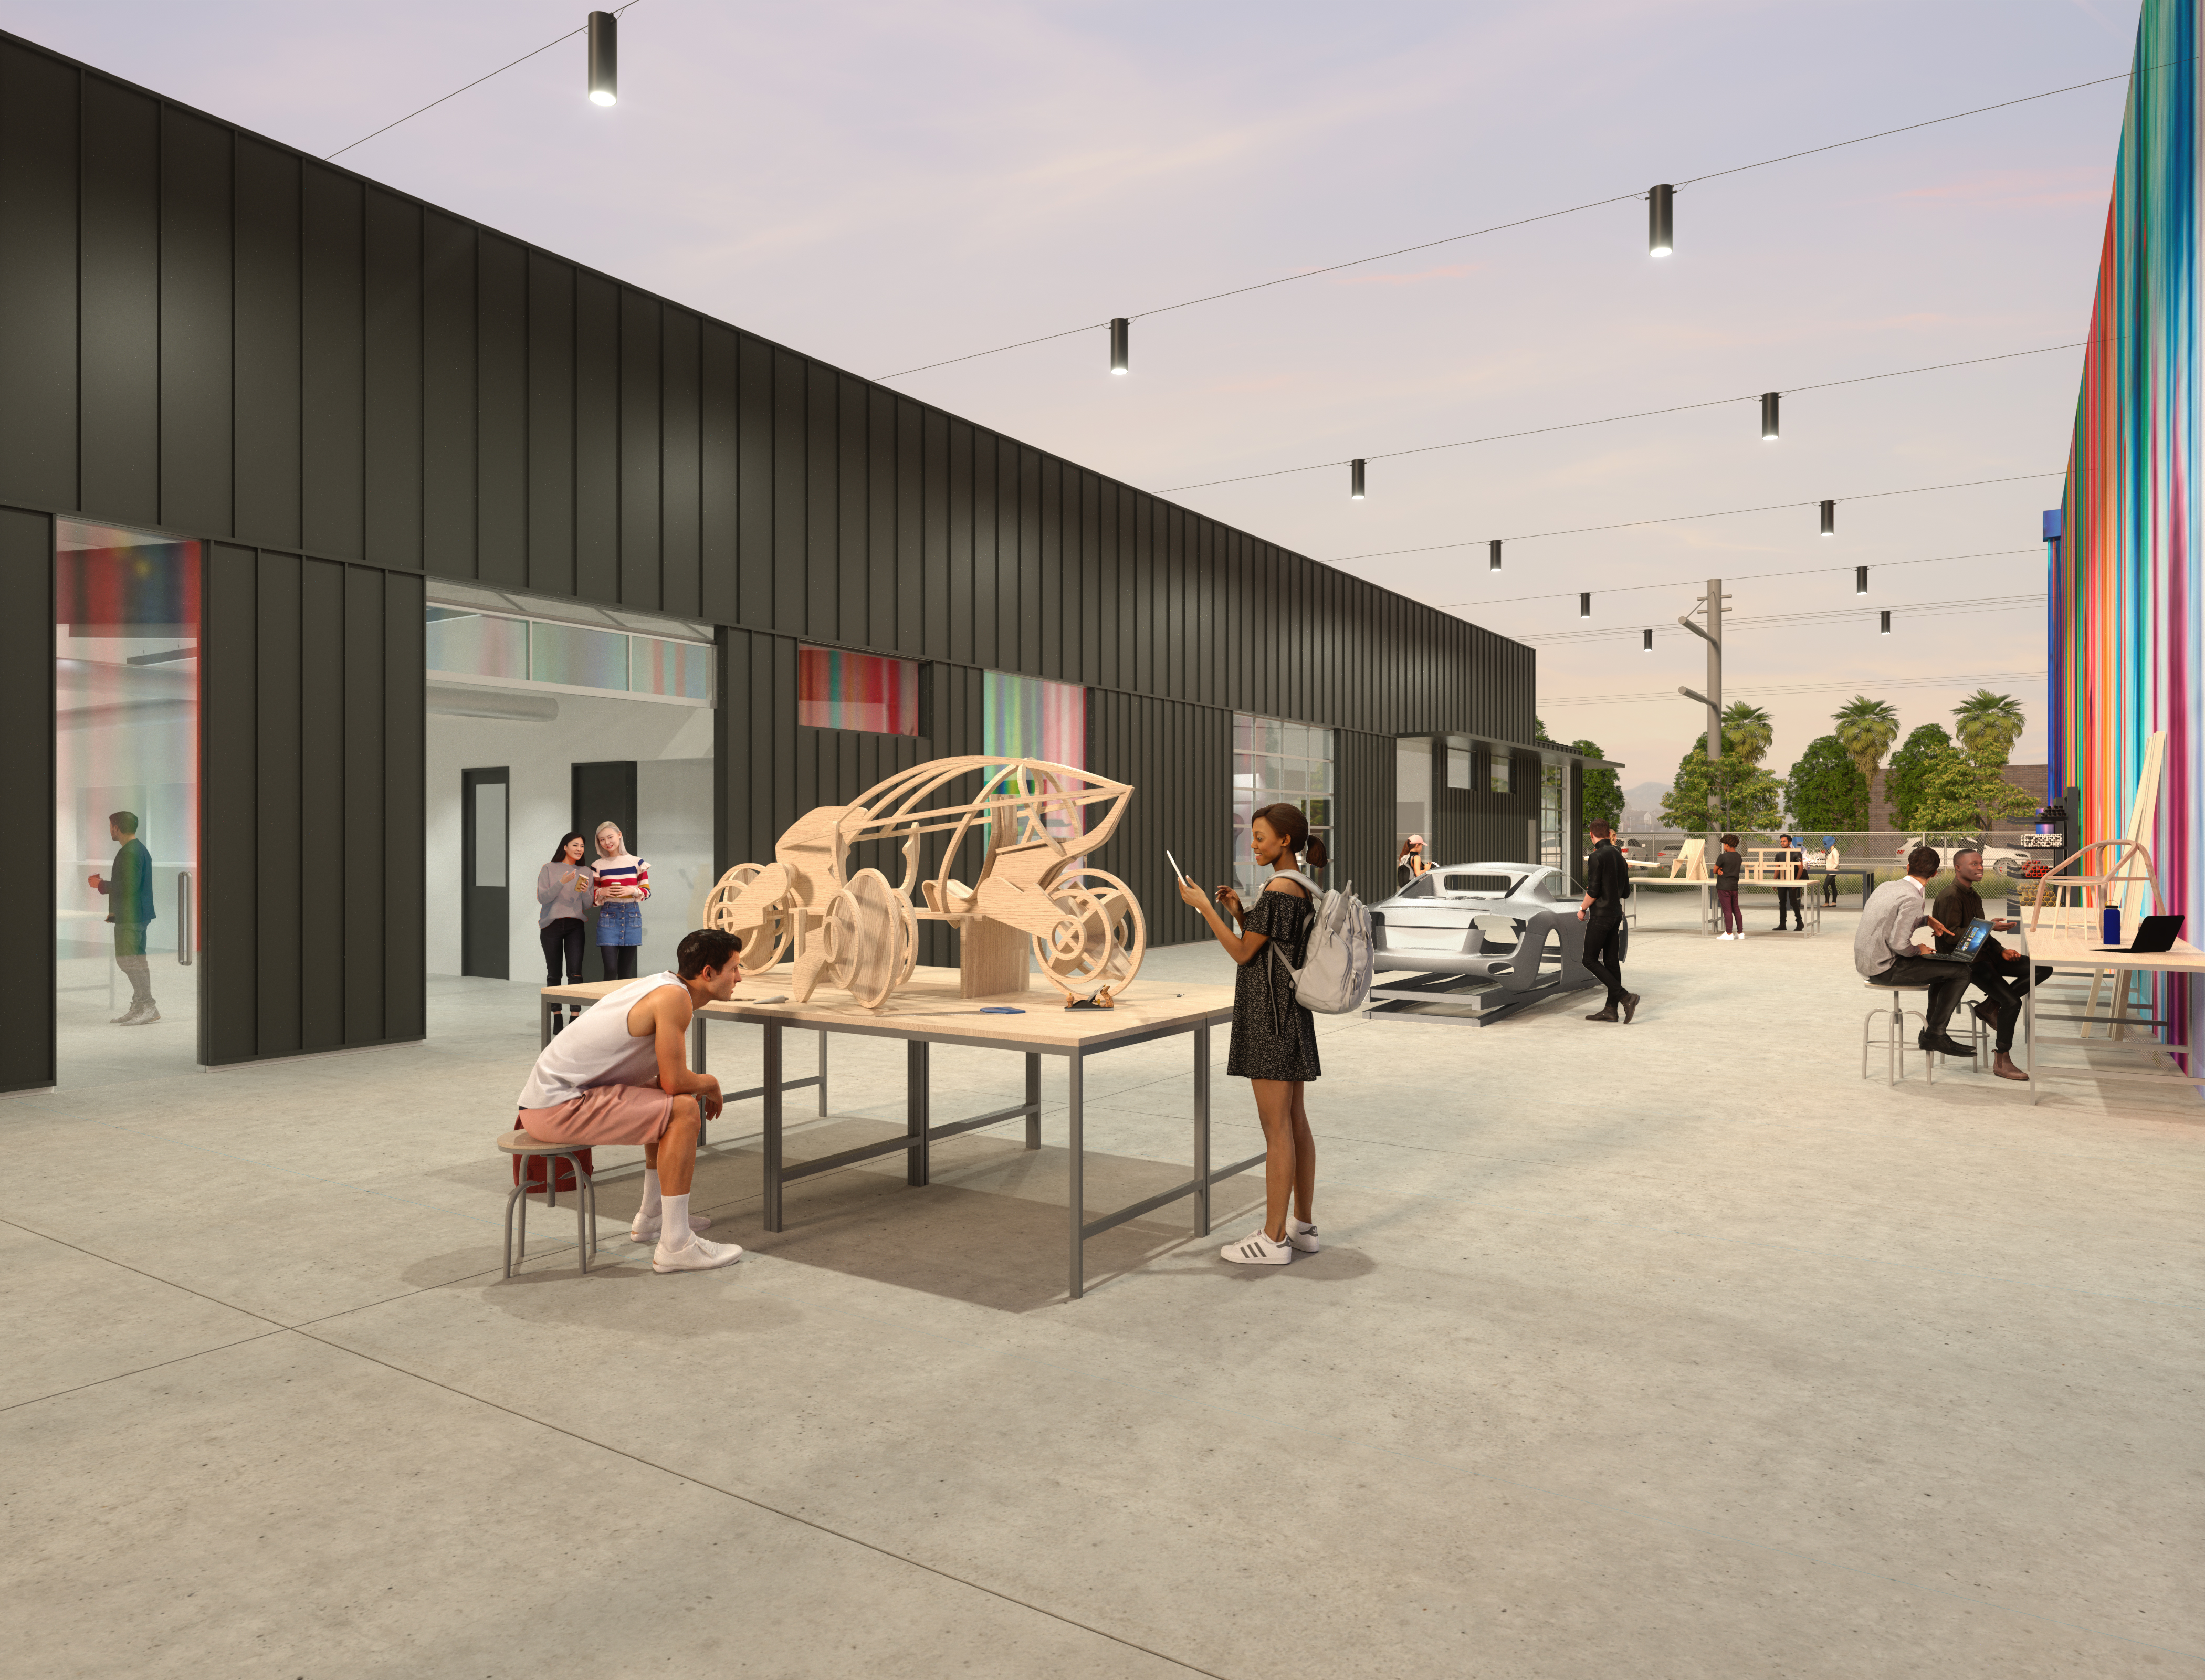 A rendering of 908 shops, New state-of-the-art facility will expand hands-on fabrication spaces, labs and studios for the next generation of artists and designers at ArtCenter College of Design.